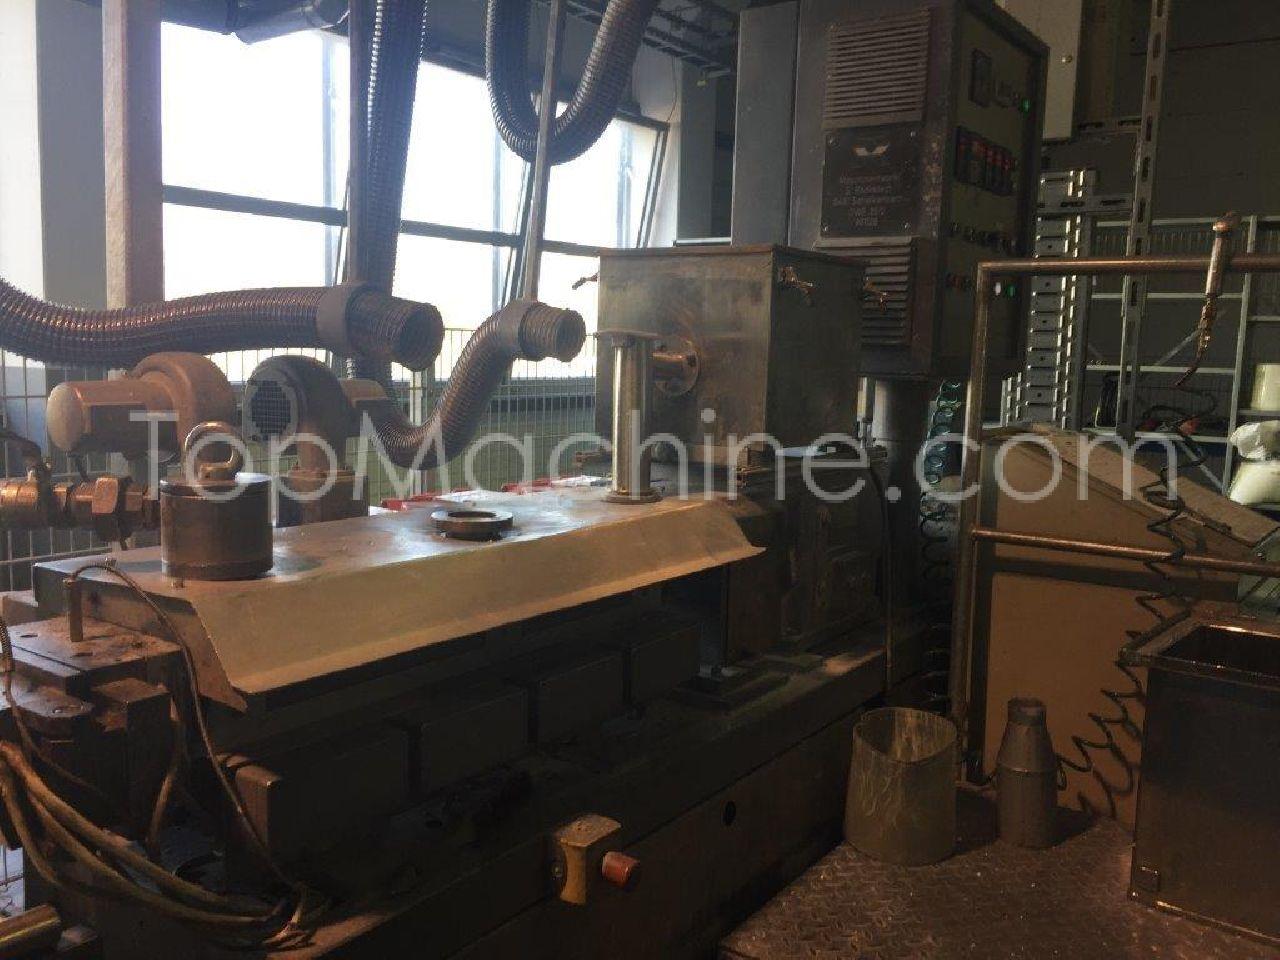 Used Rockstedt 55 2 Compounding Compounding line